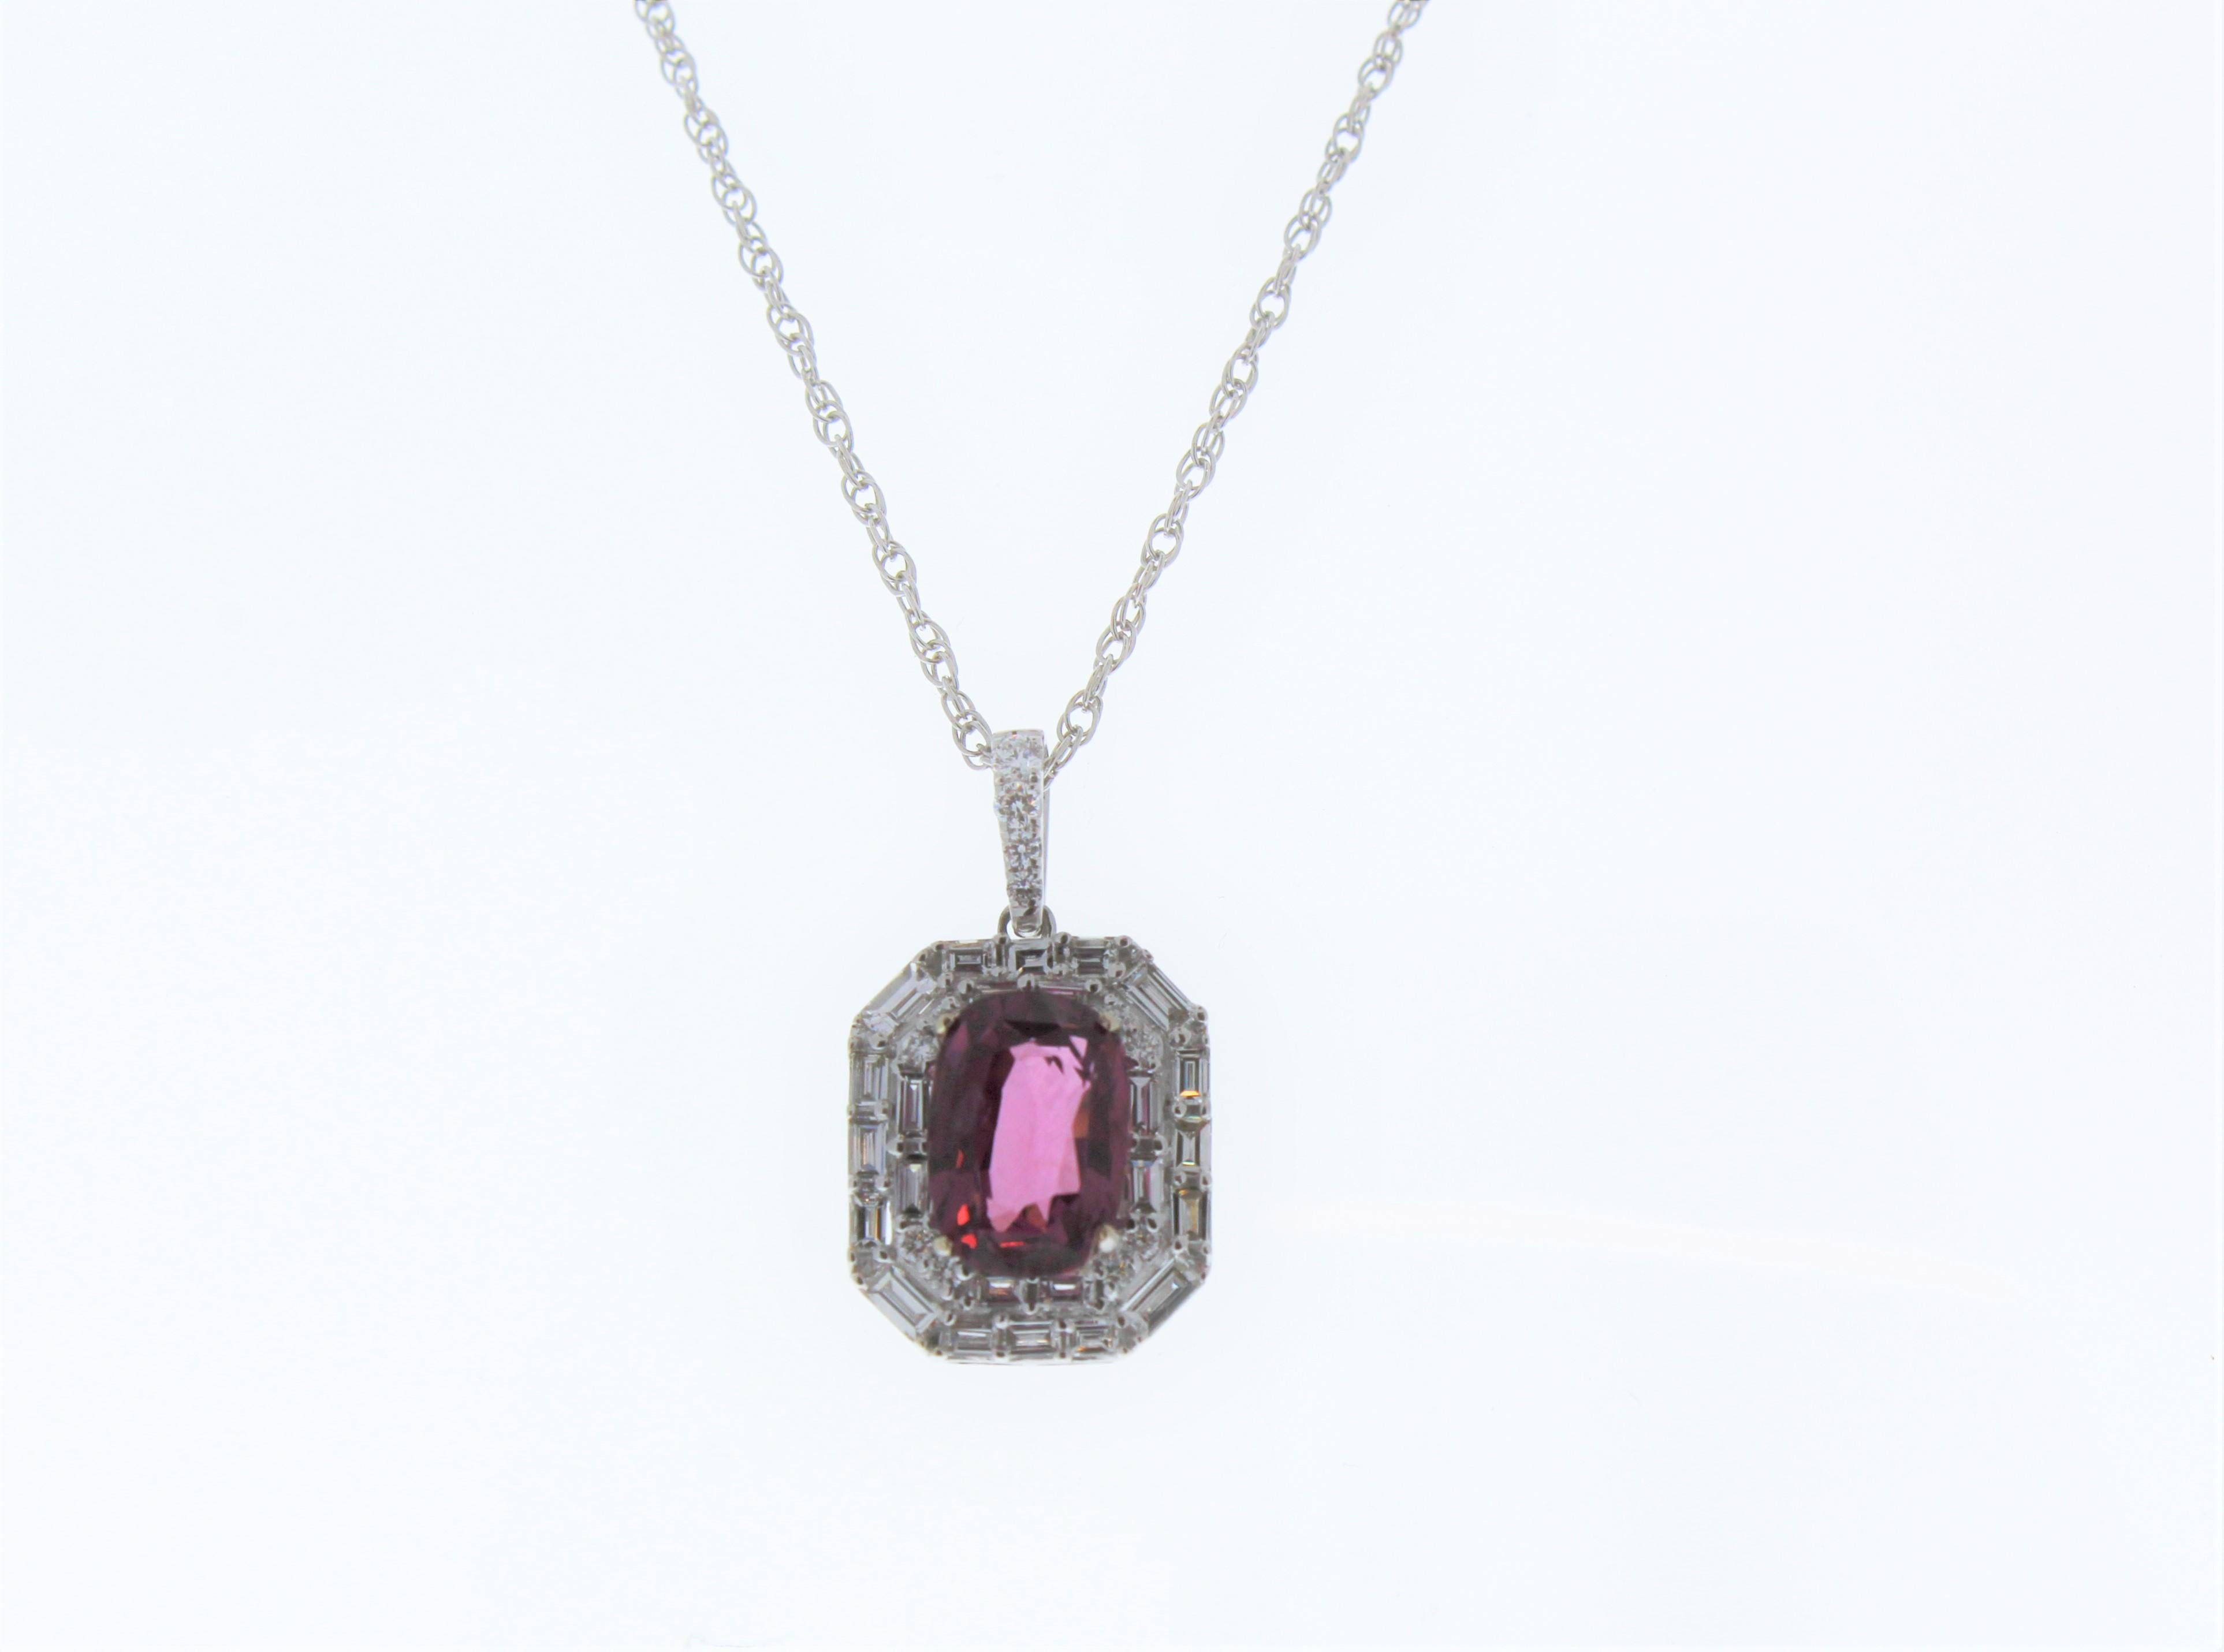 This gorgeous Cushion Cut Spinel gemstone pendant of 2.93CTW is surrounded by glistening natural diamonds that total up to 0.68CTW. The pendant is set in 18K White Gold.